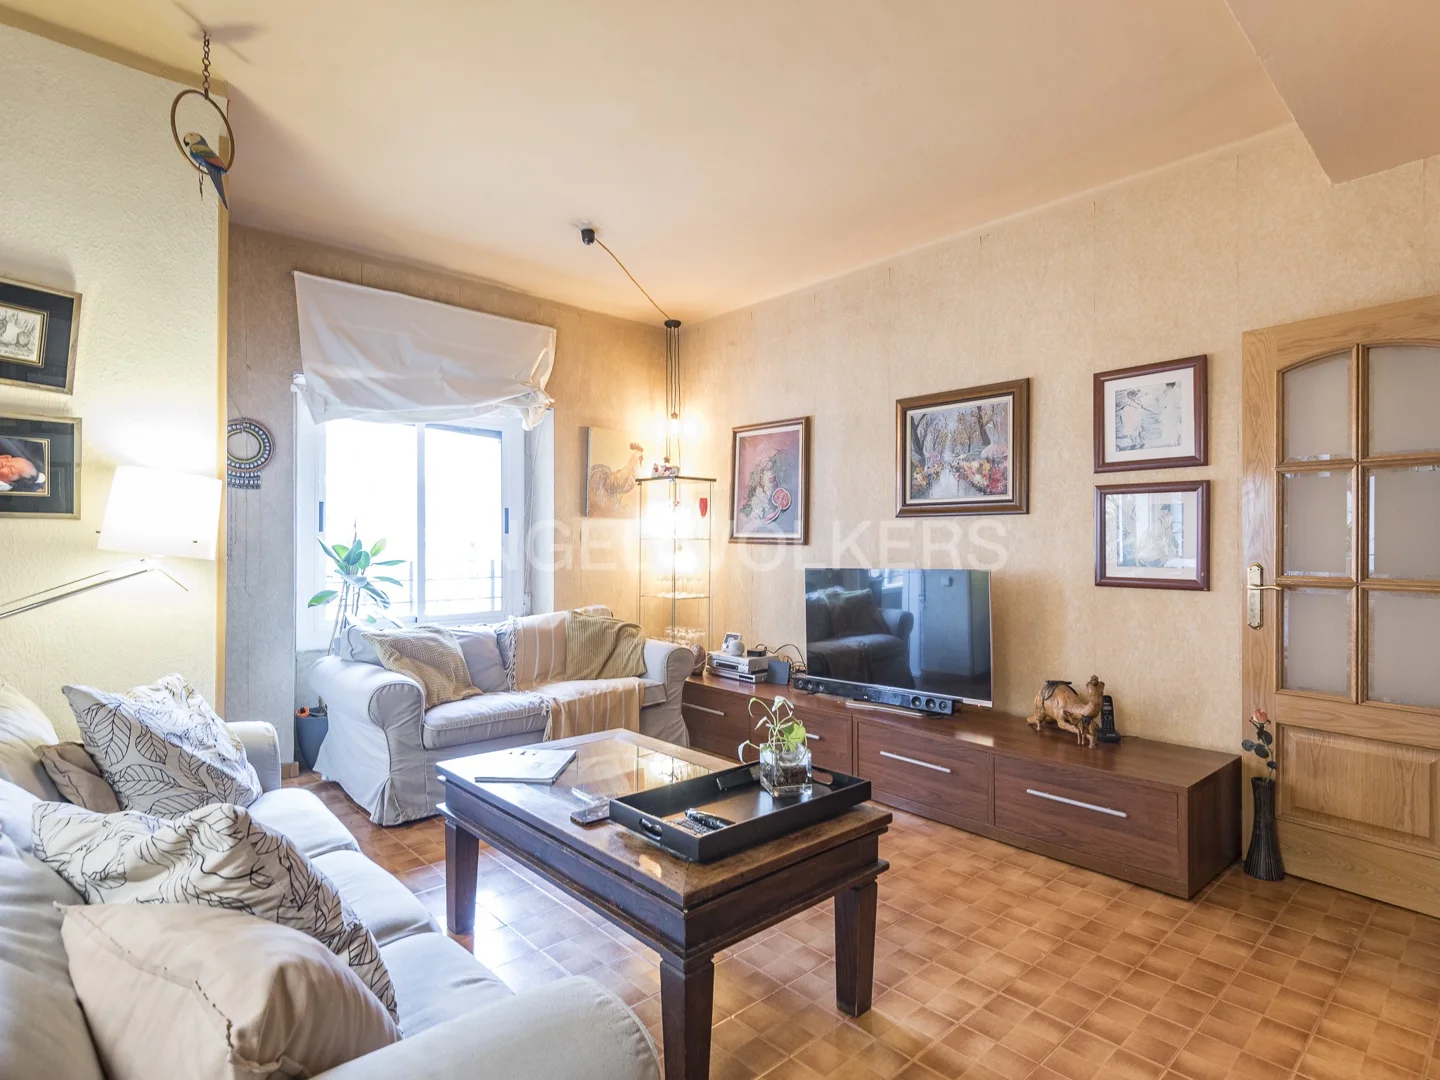 Charming apartment in the attractive El Clot neighborhood